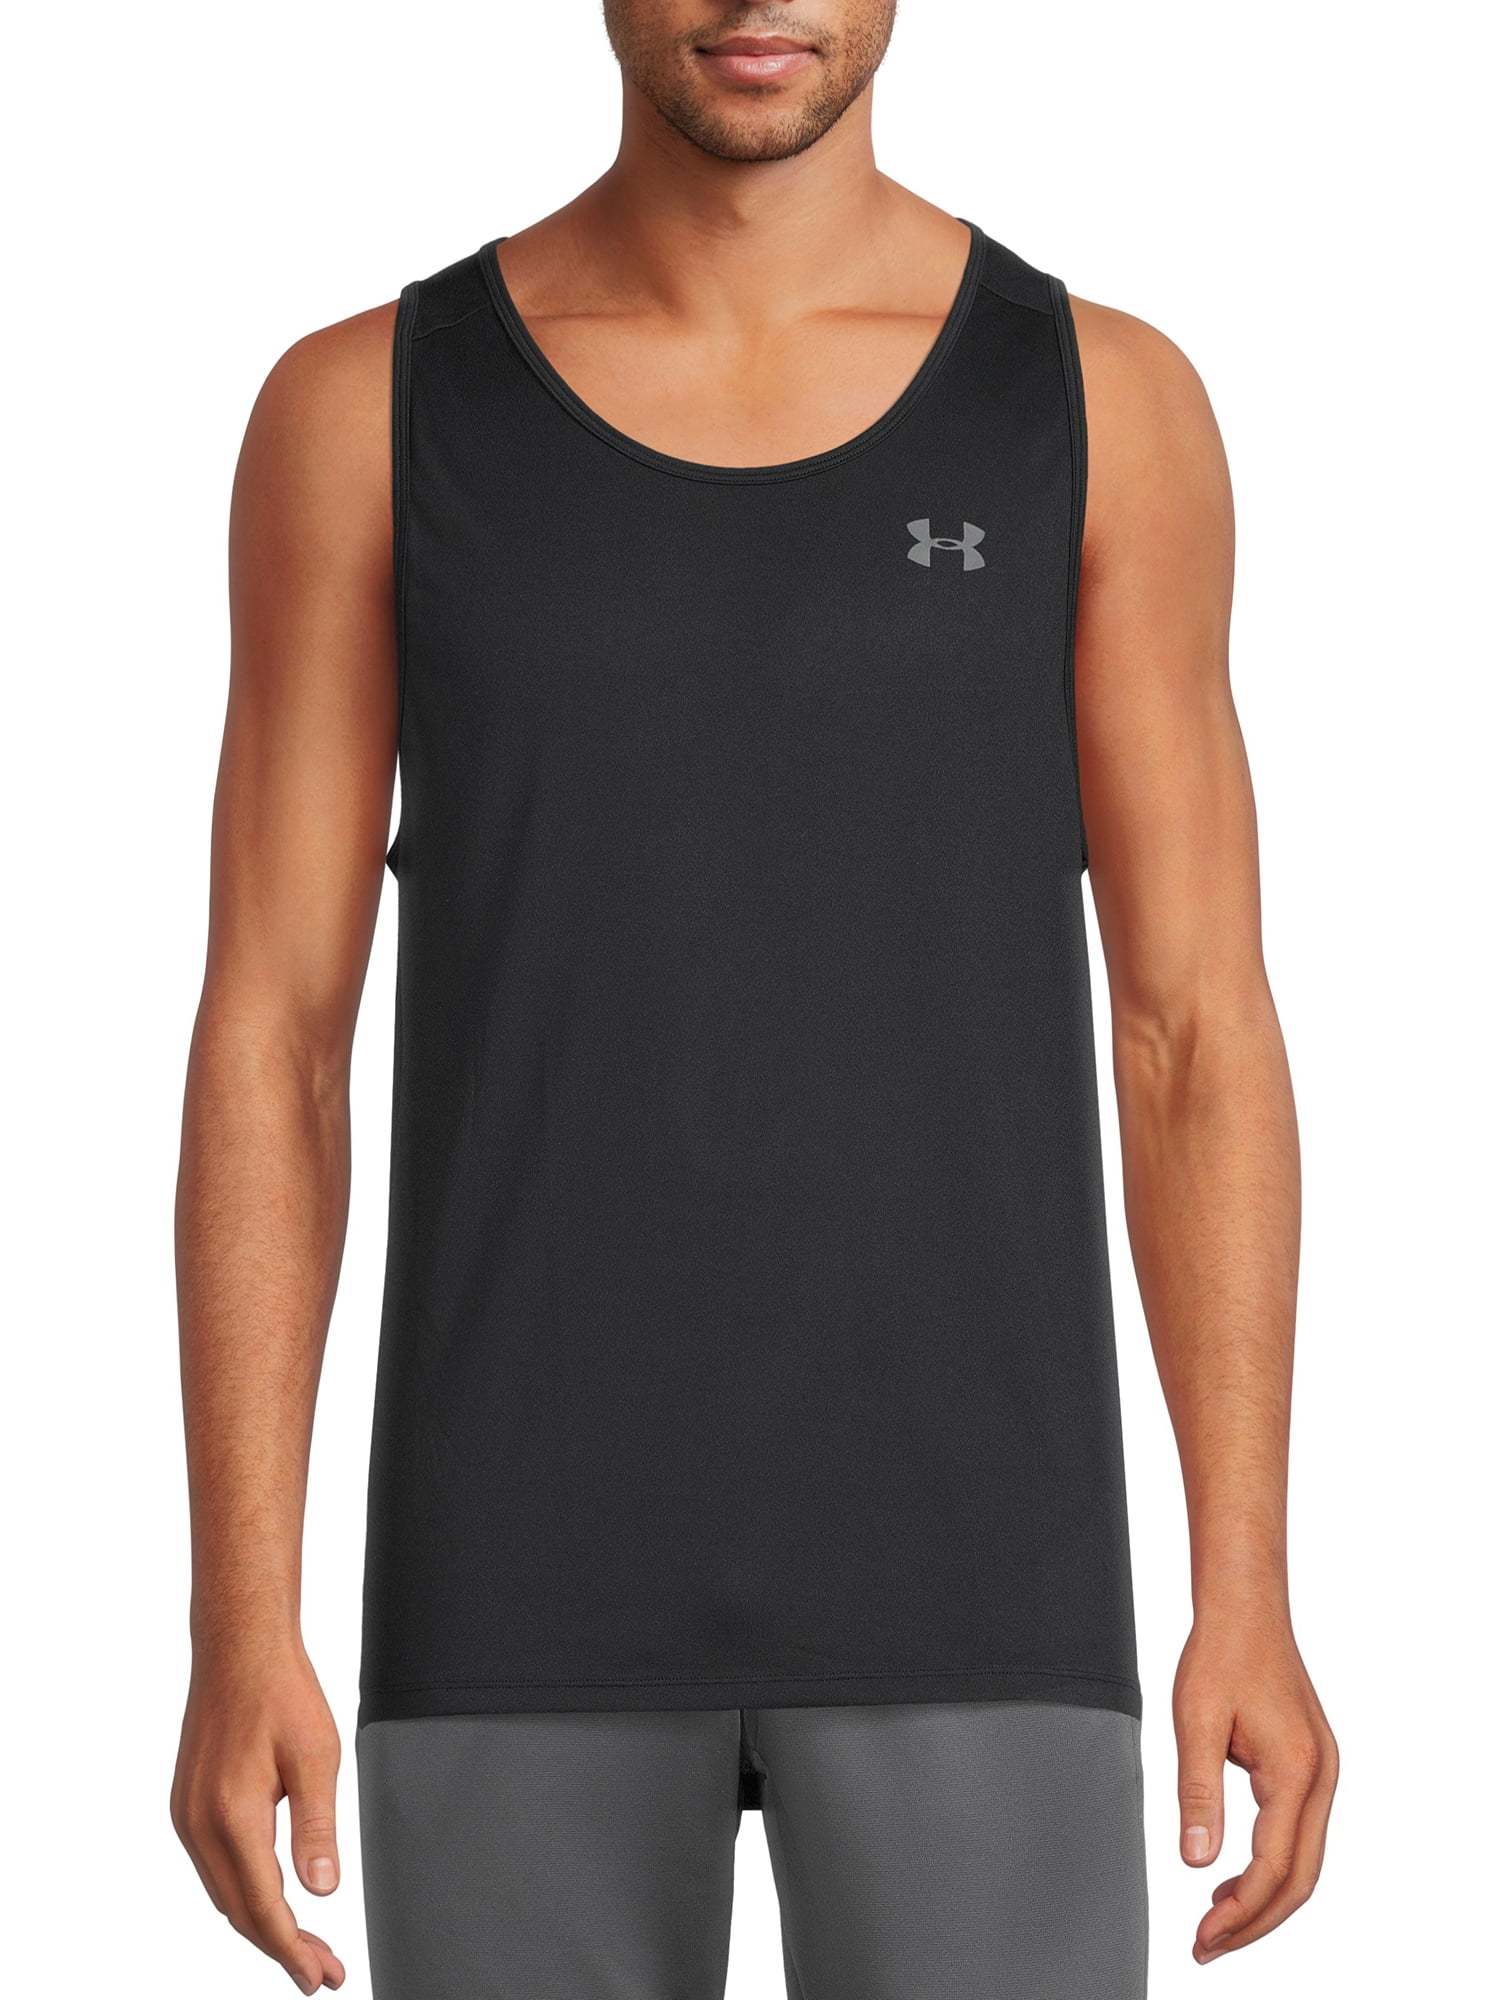 Under Armour Men's and Big Men's UA Tech Tank Top 2.0, Sizes up to 